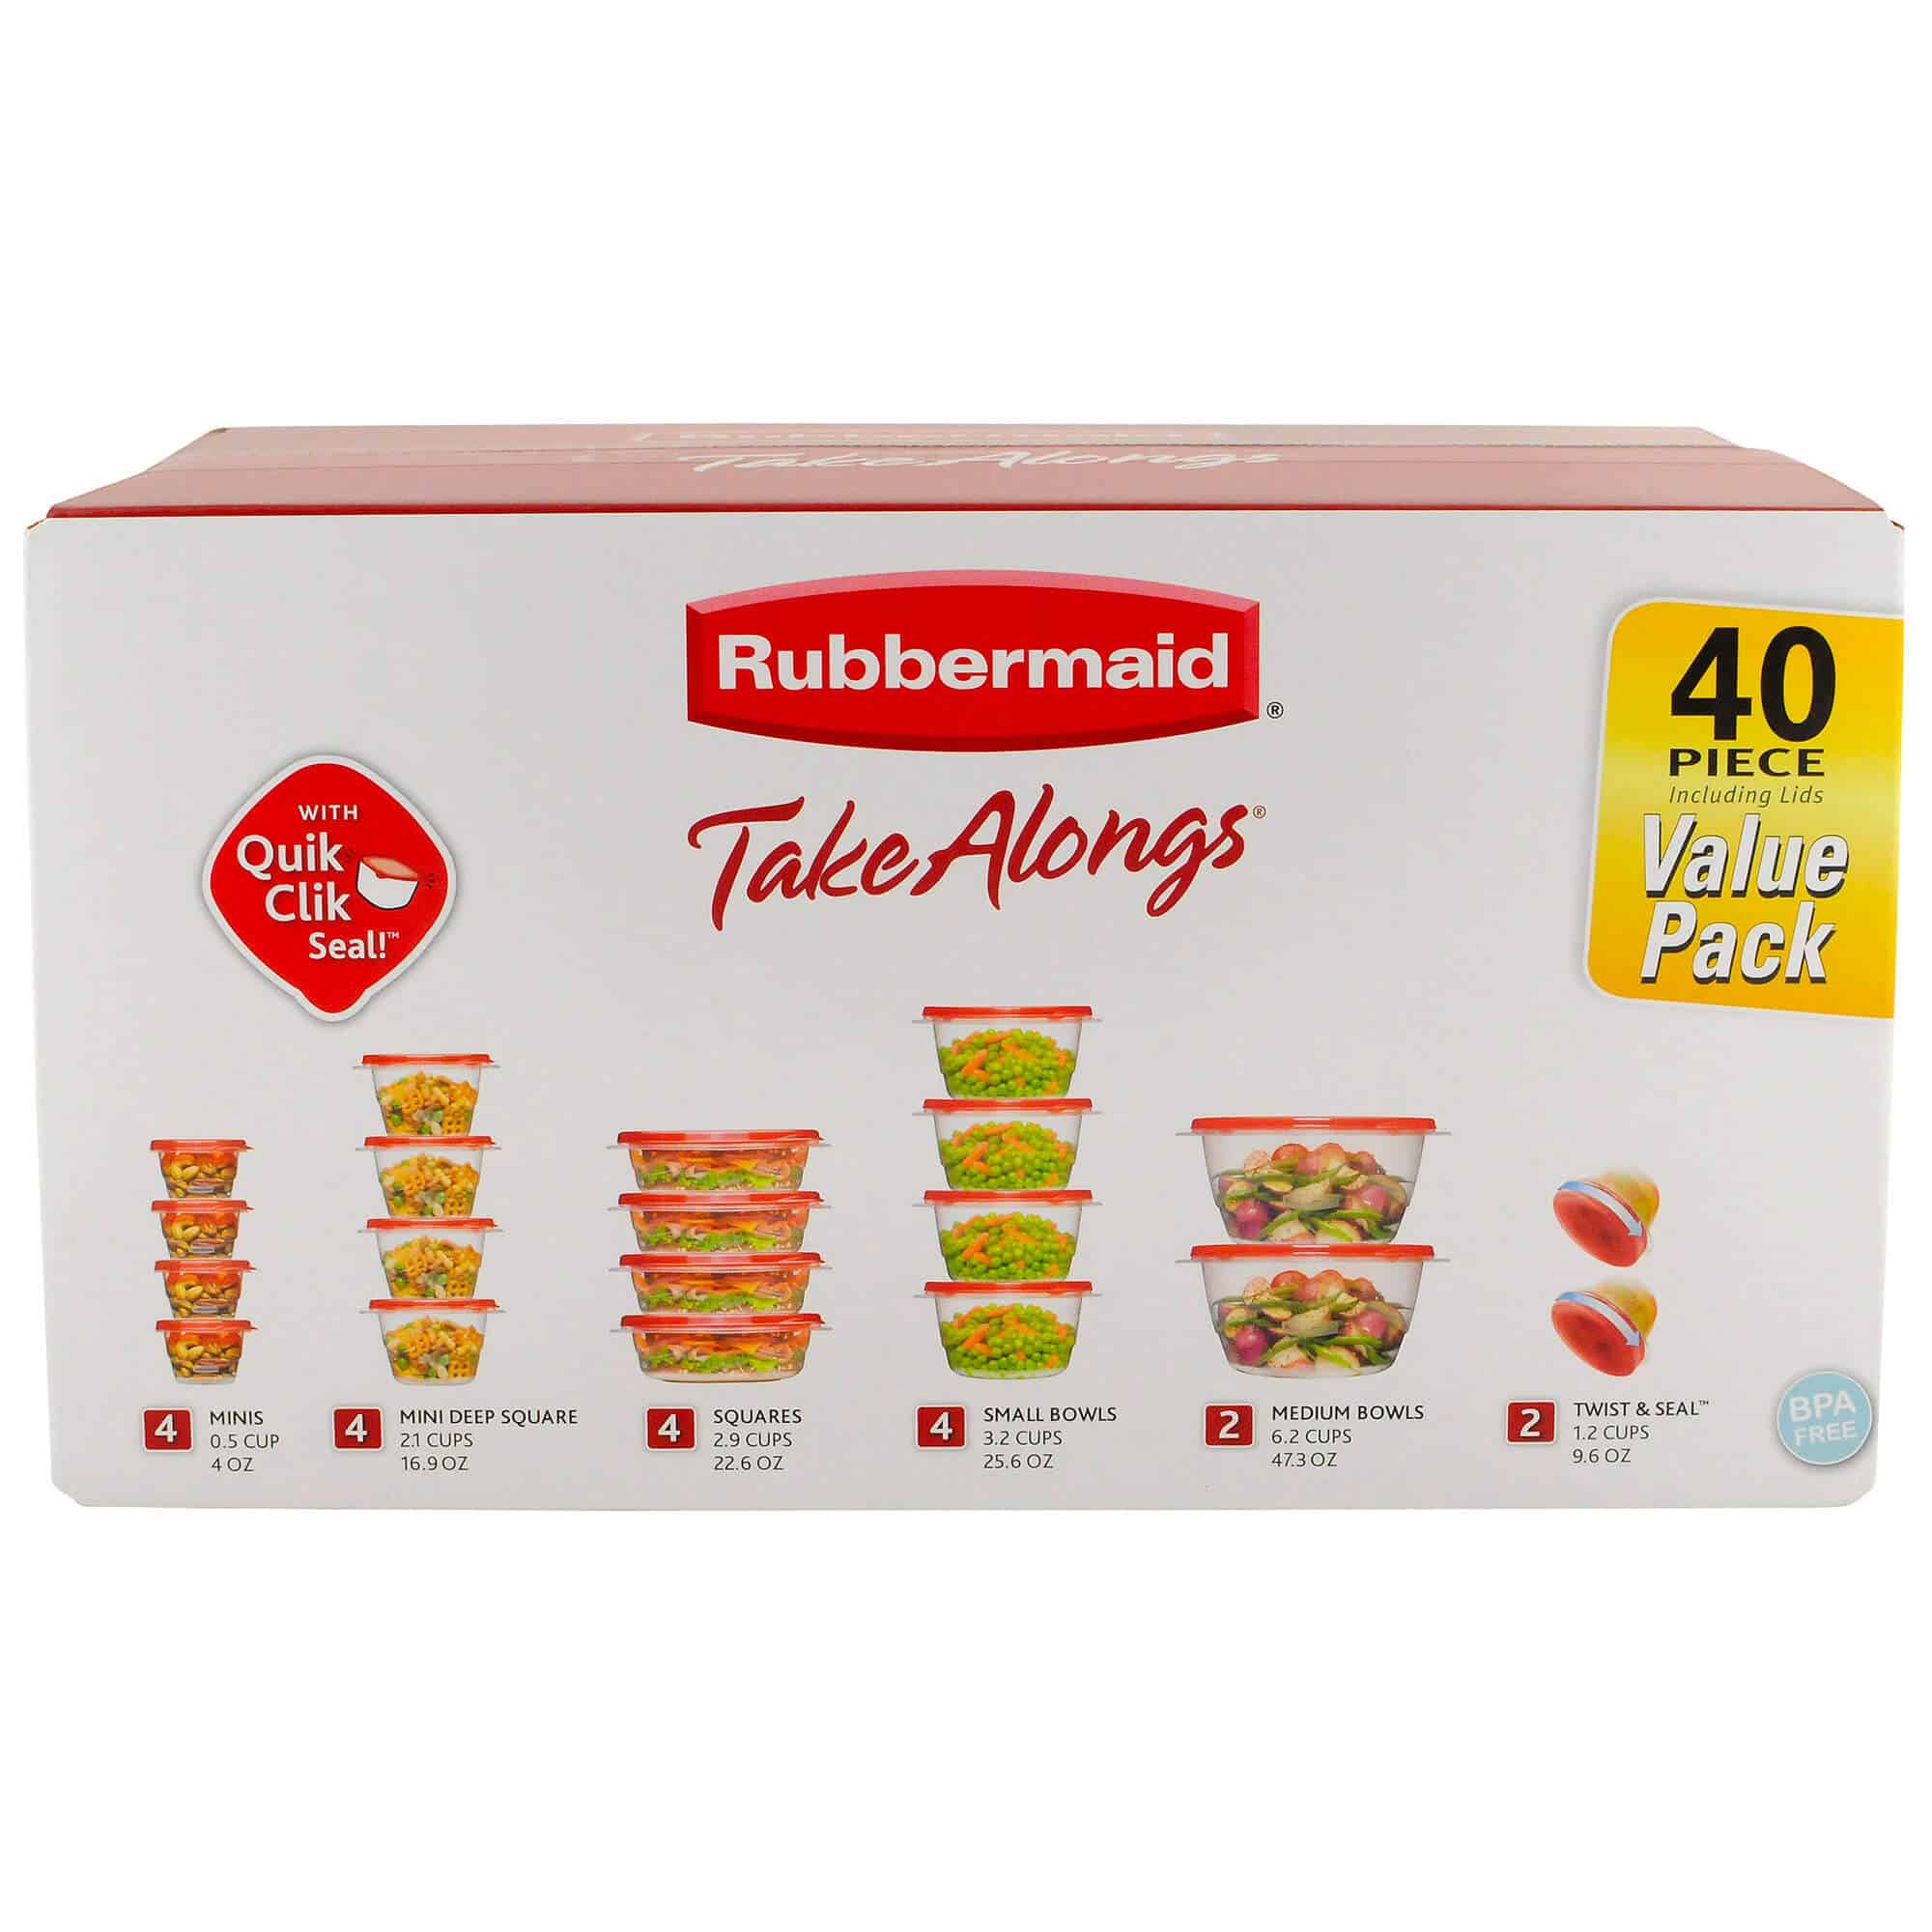 Rubbermaid TakeAlongs Food Storage Containers, 40 Piece Set ONLY $9.98